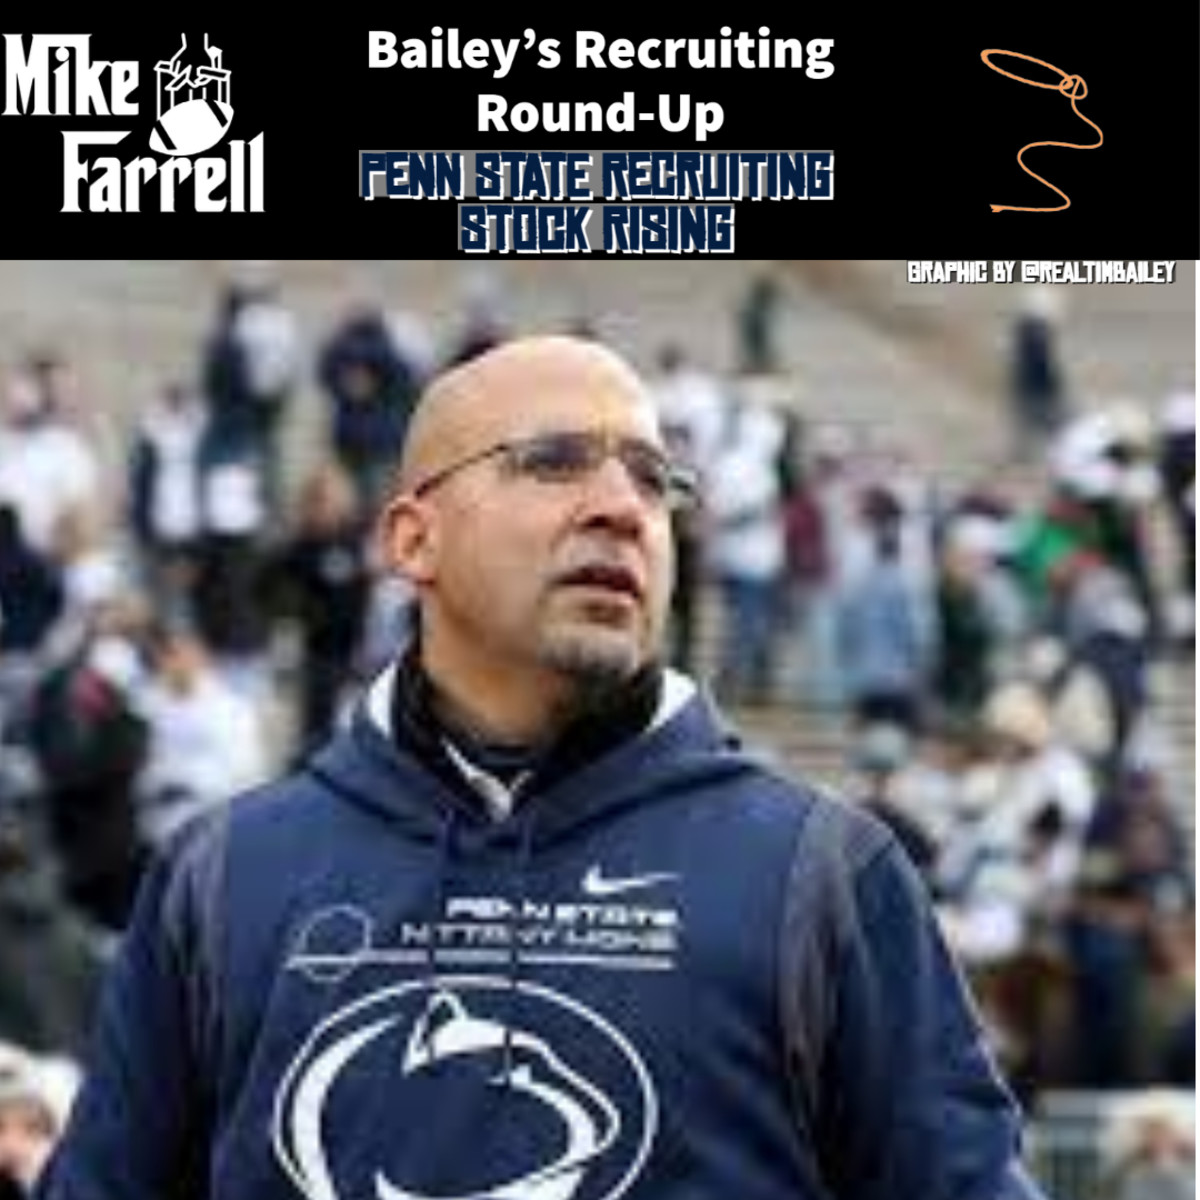 recruiting round-up Penn State